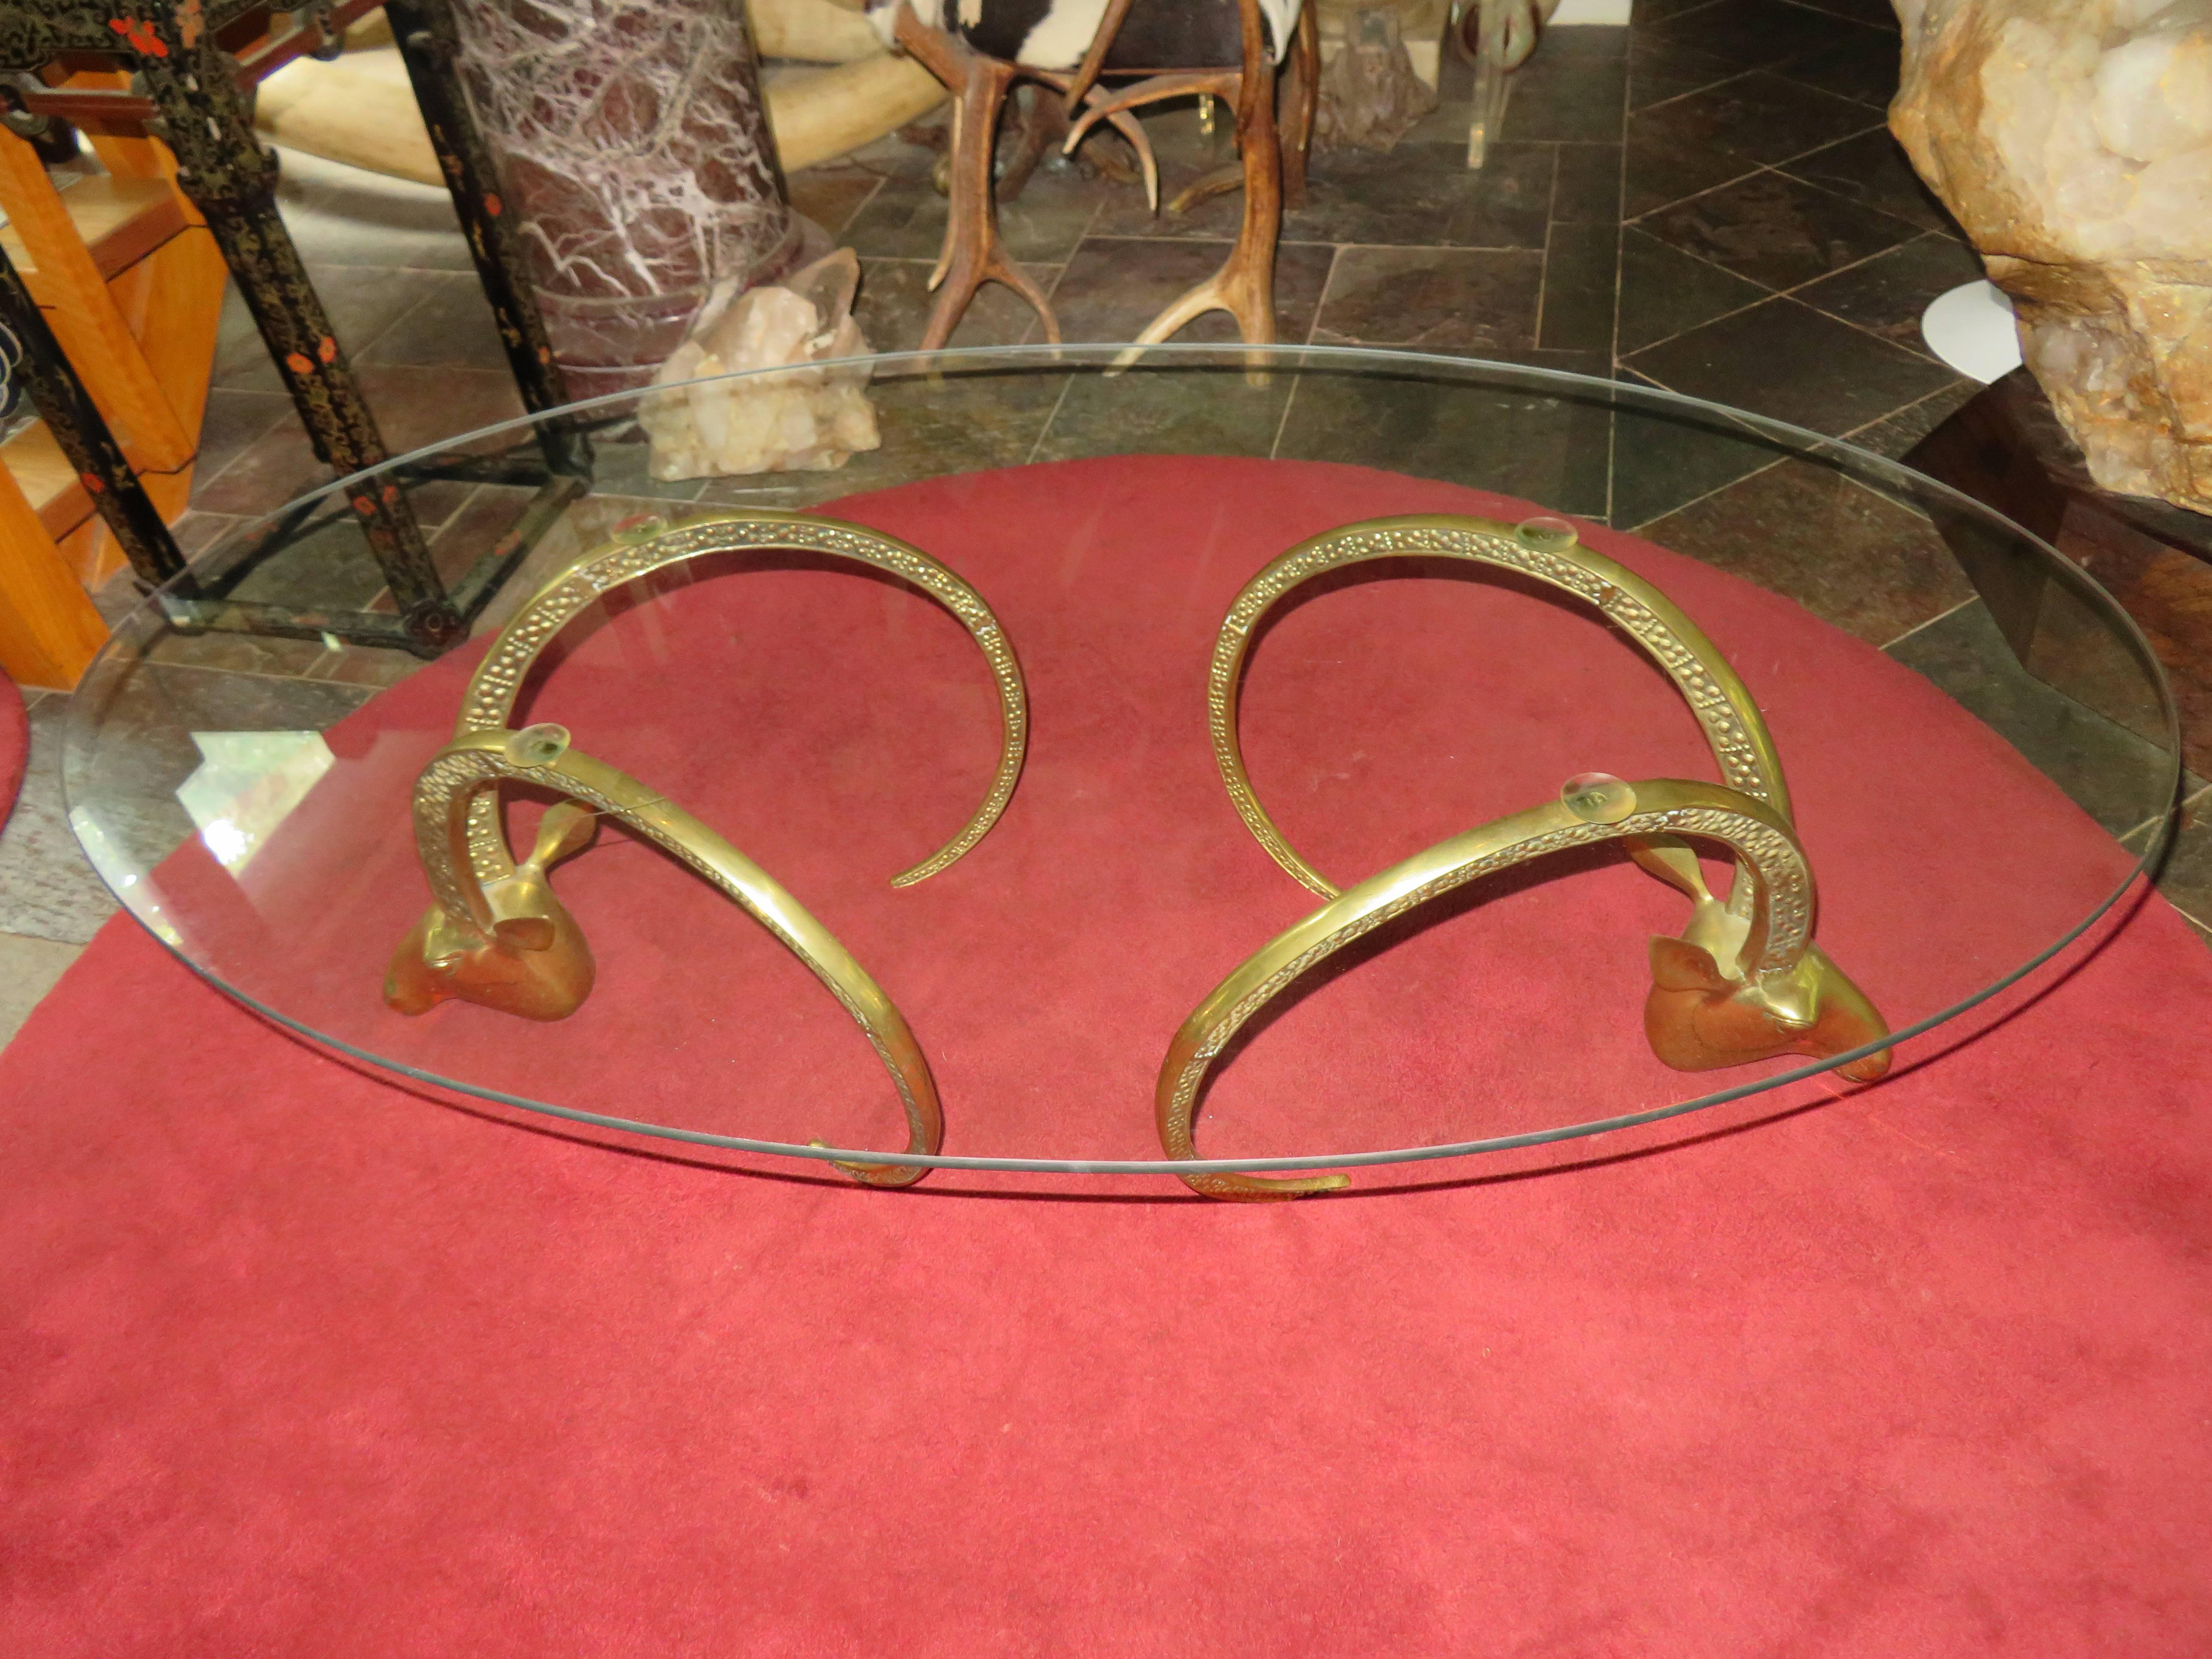 Magnificent brass ibex ram head coffee table. We do have two pairs of these ram heads so one giant table can be made with a large glass top or two normal size coffee tables like pictured. We are selling the tables individually but email for special